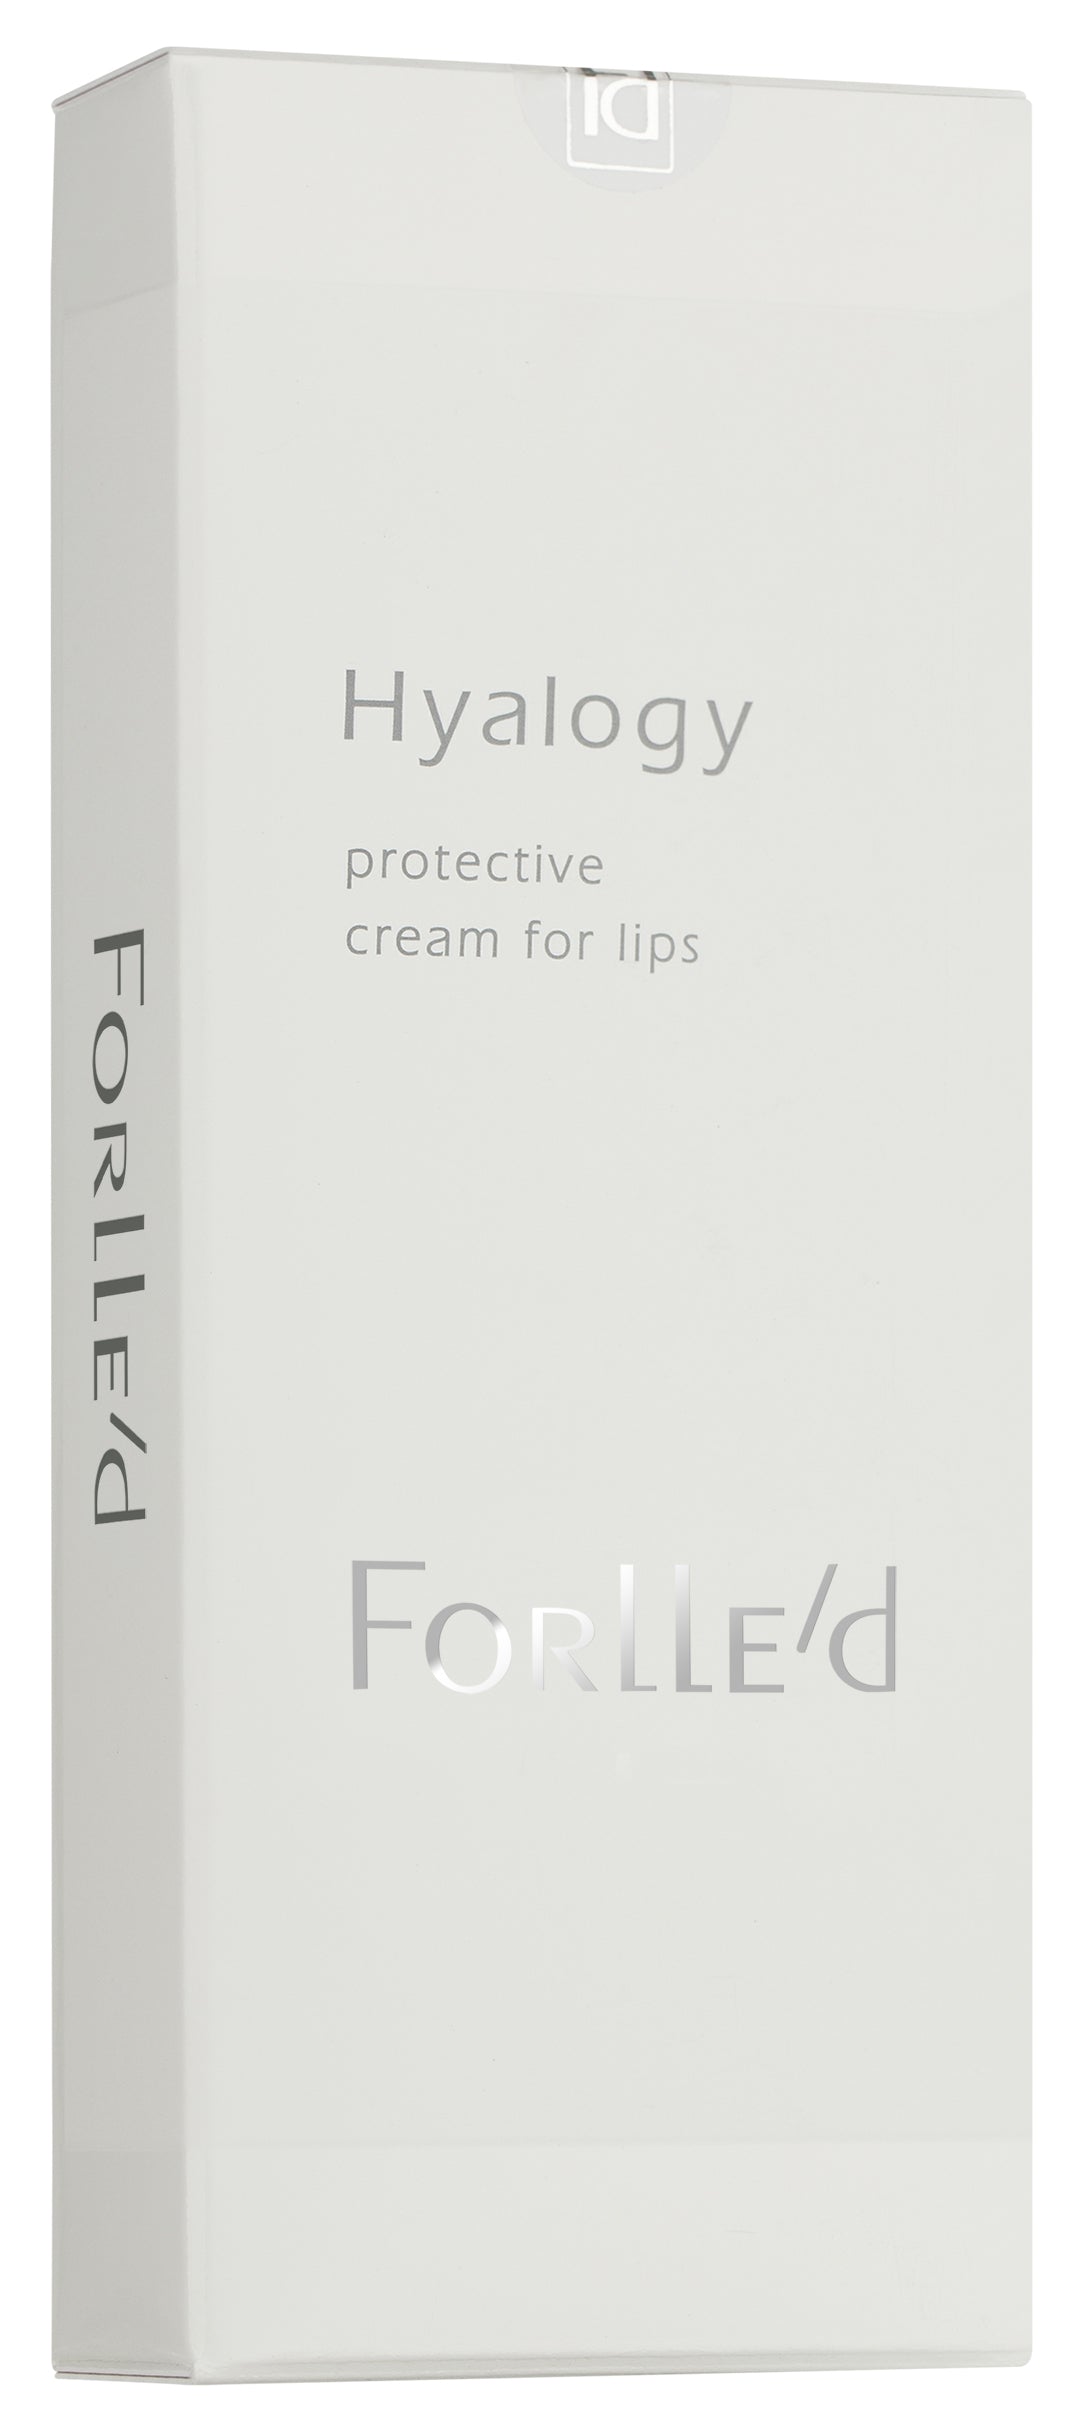 Forlle'd Hyalogy Protective Cream for Lips (9ml)